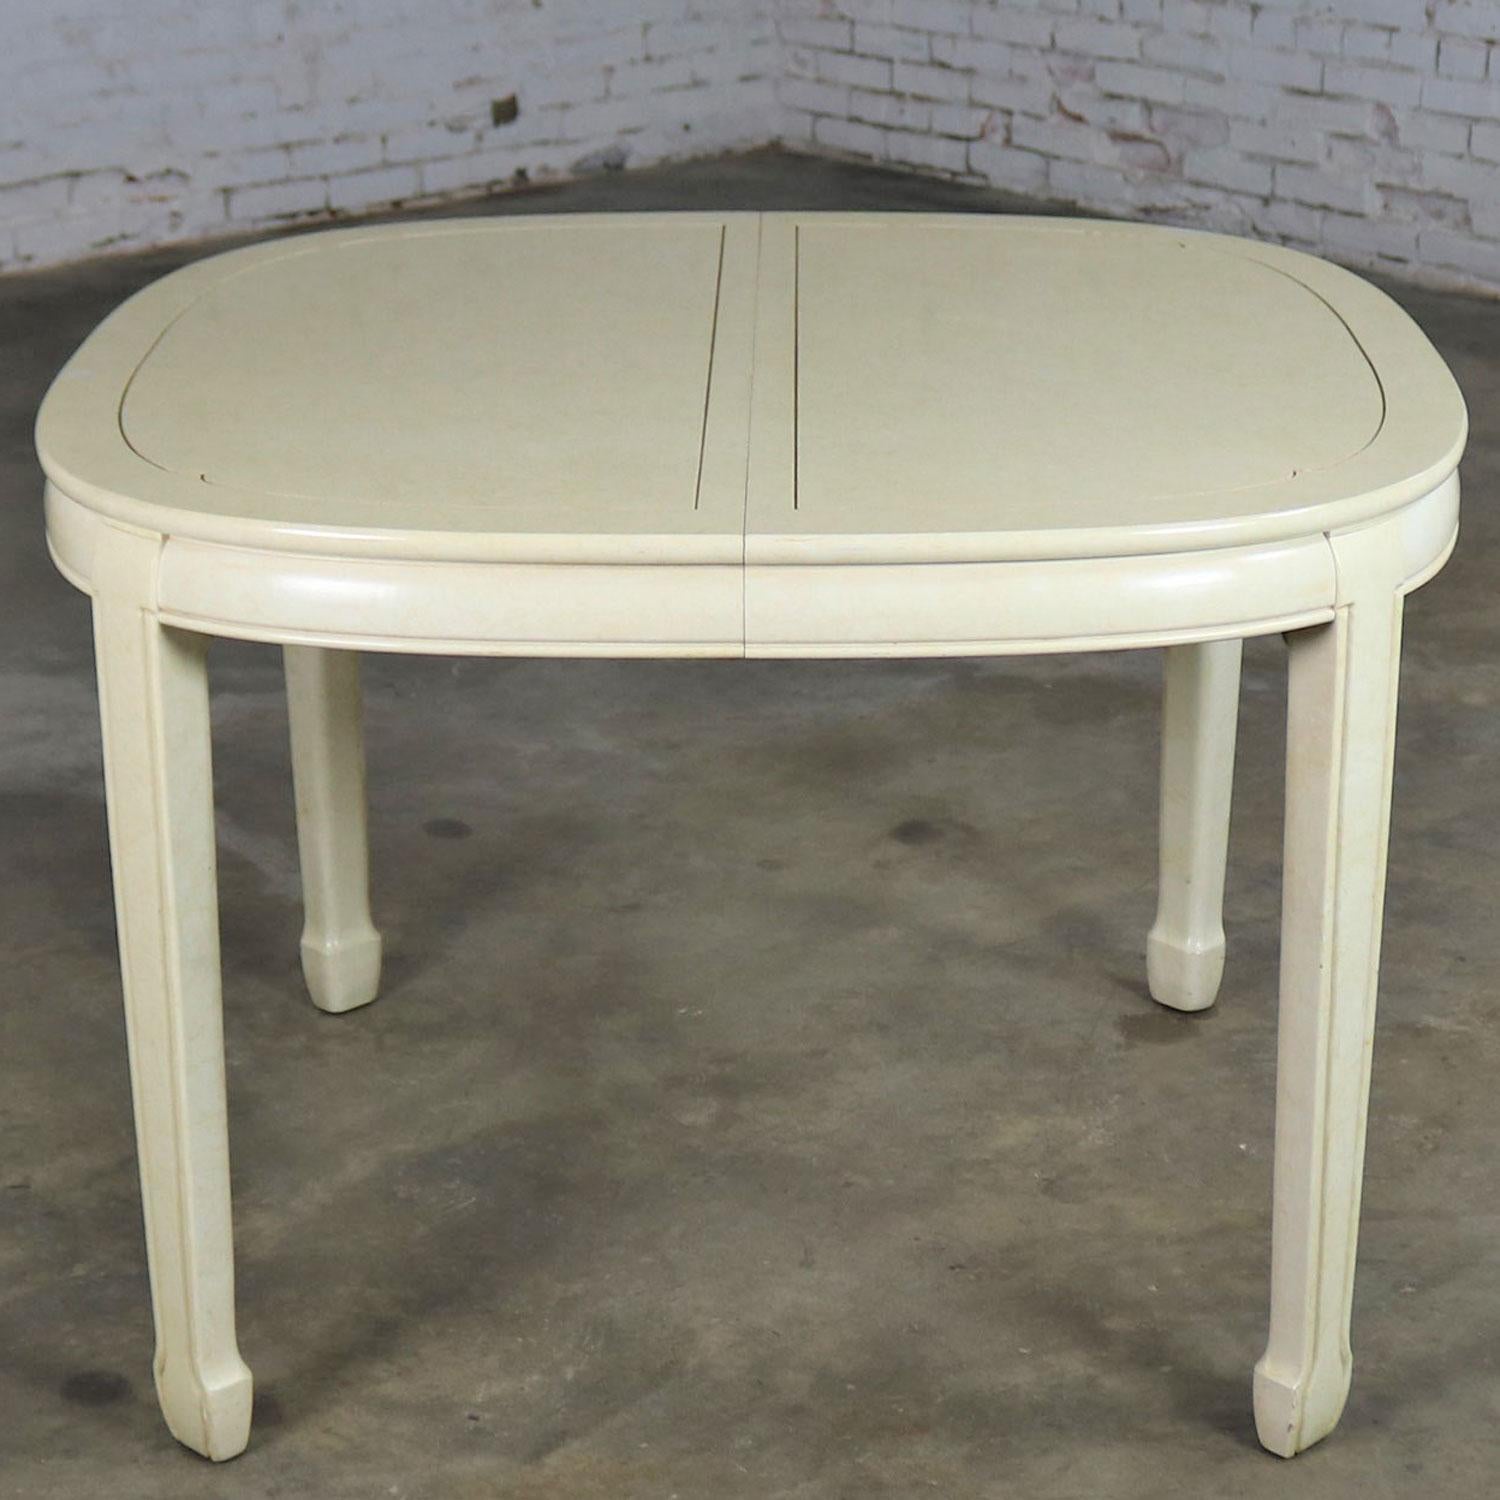 Handsome off-white Asian style, Ming style, or Chinoiserie oval dining table with two leaves by White Fine Furniture. It is in wonderful vintage condition. There are a few nicks and dings as you would expect for its age but nothing outstanding. We